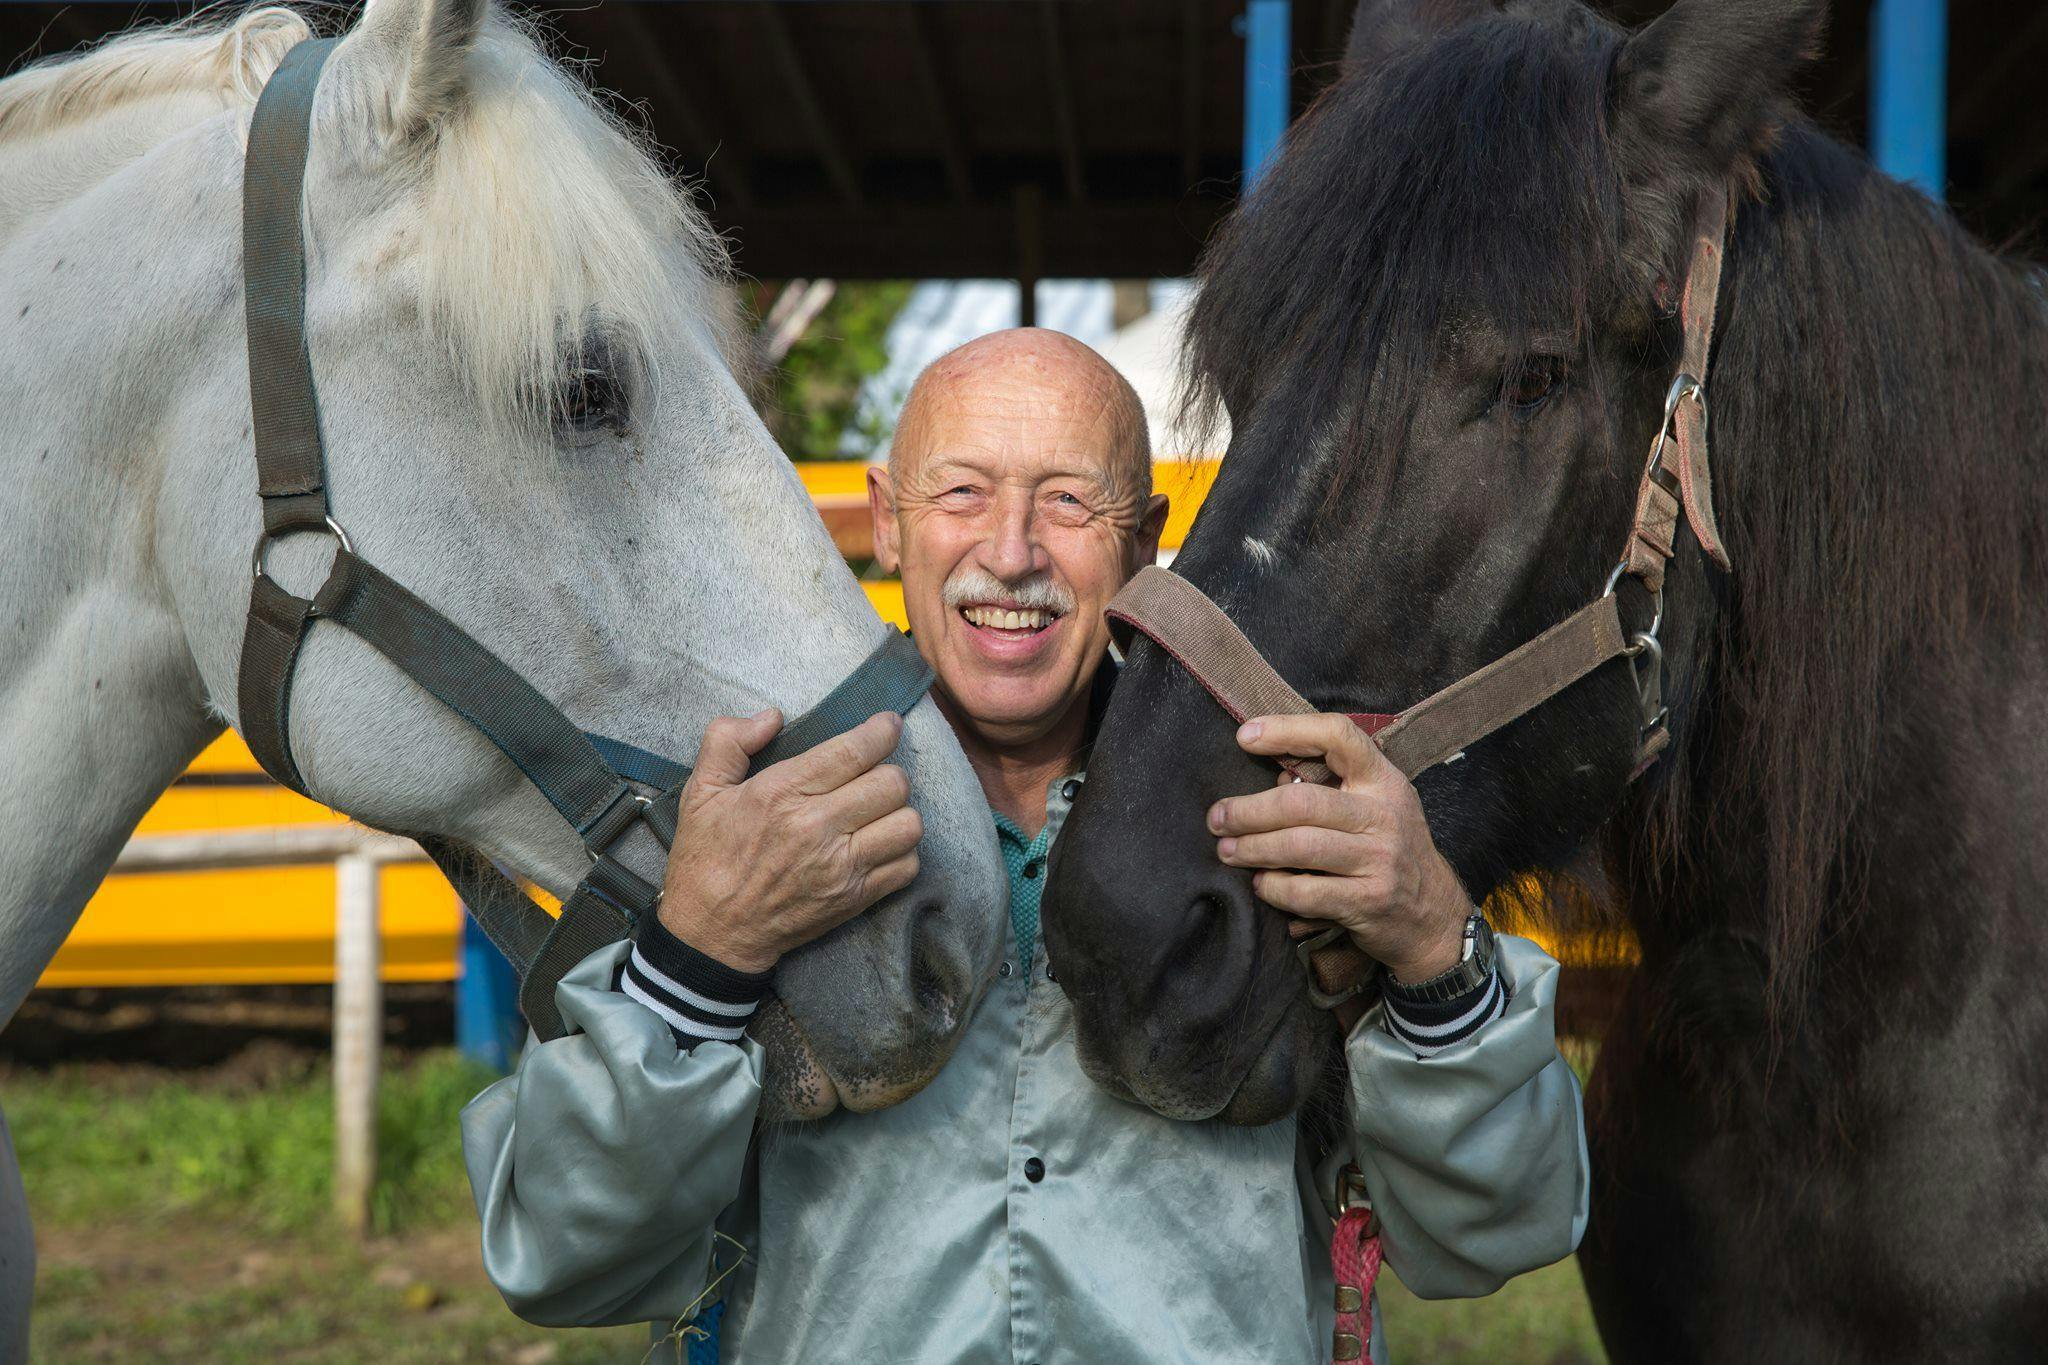 Dr. Pol petting two horses